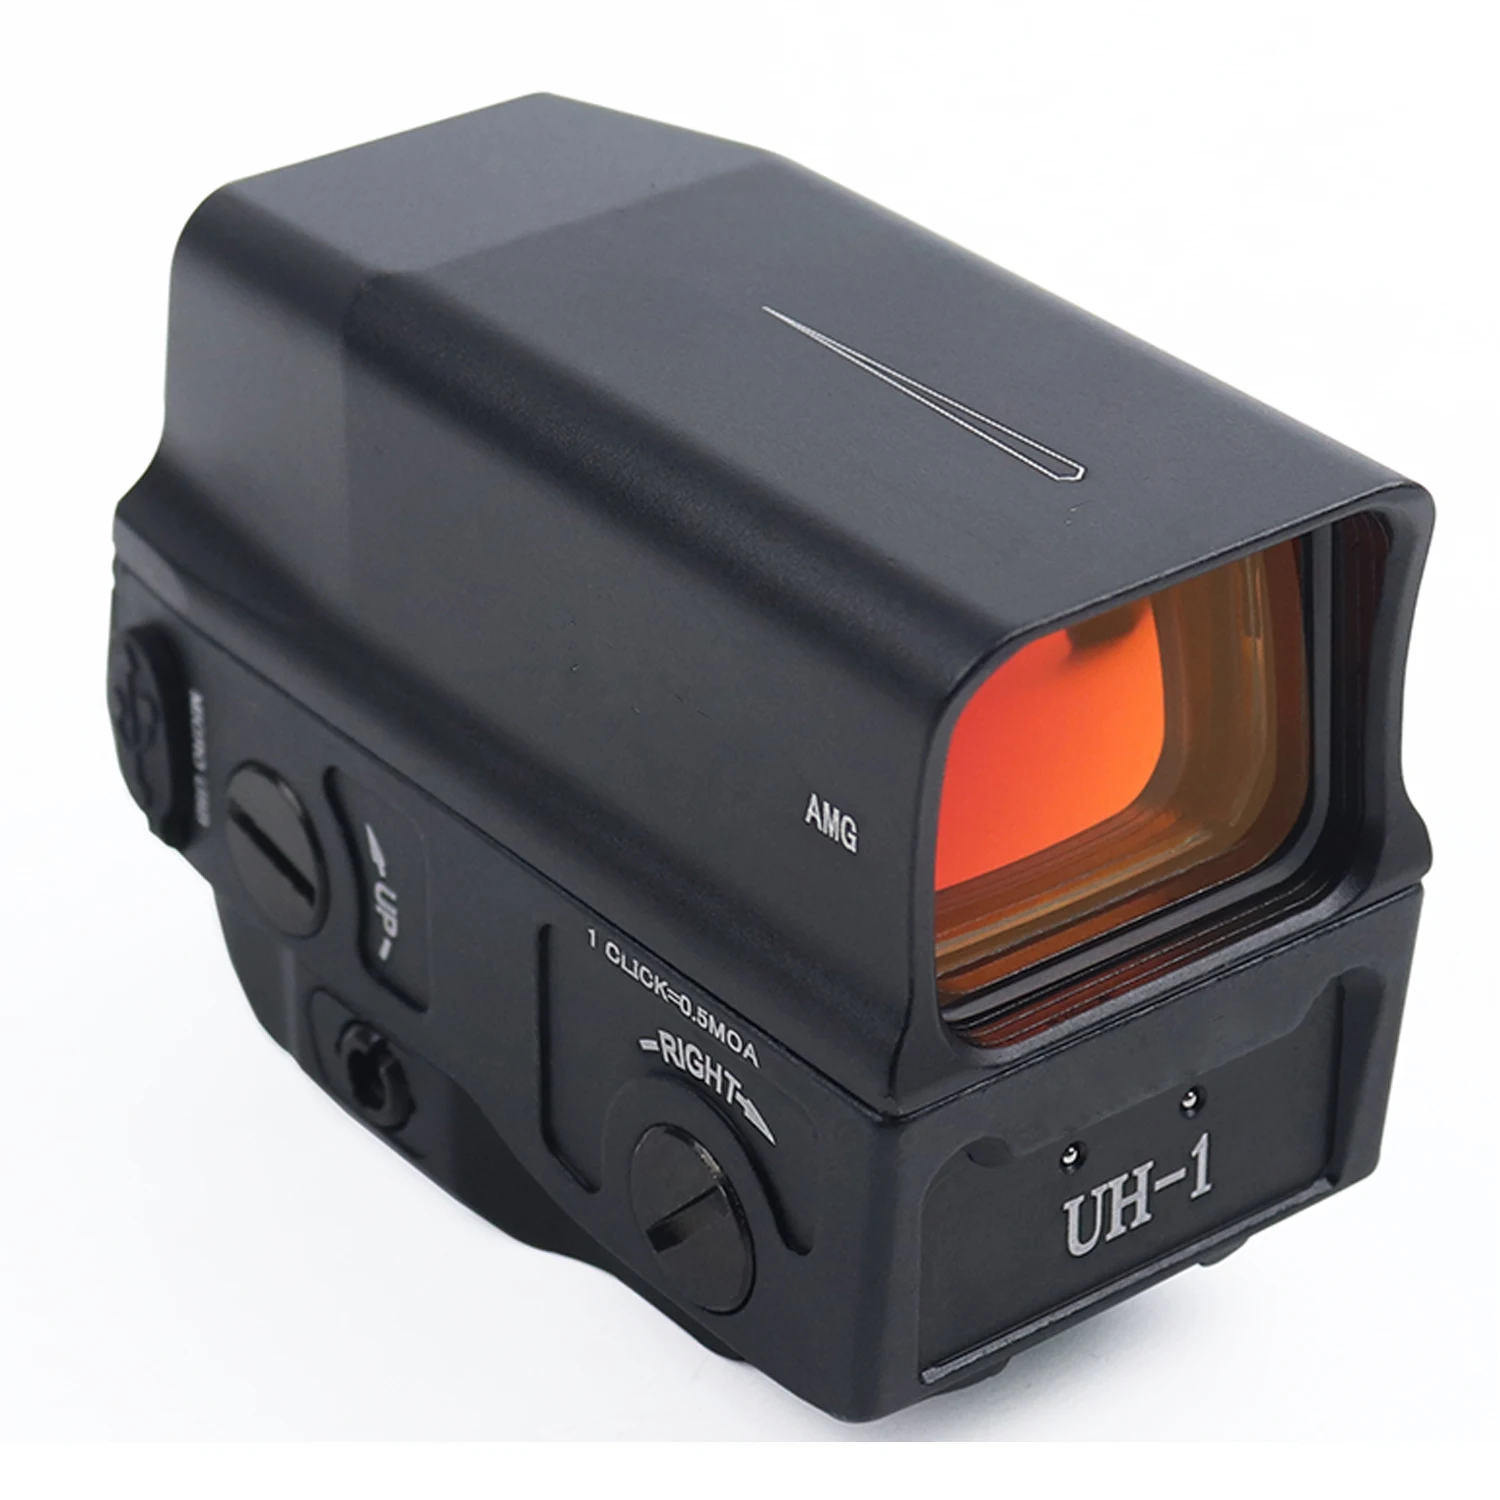 

VTX Tactical Optics AMG UH-1 Holographic 1x Magnification EBR-CQB Red Dot Weapon Sight for Hunting Airsoft with Full Markings